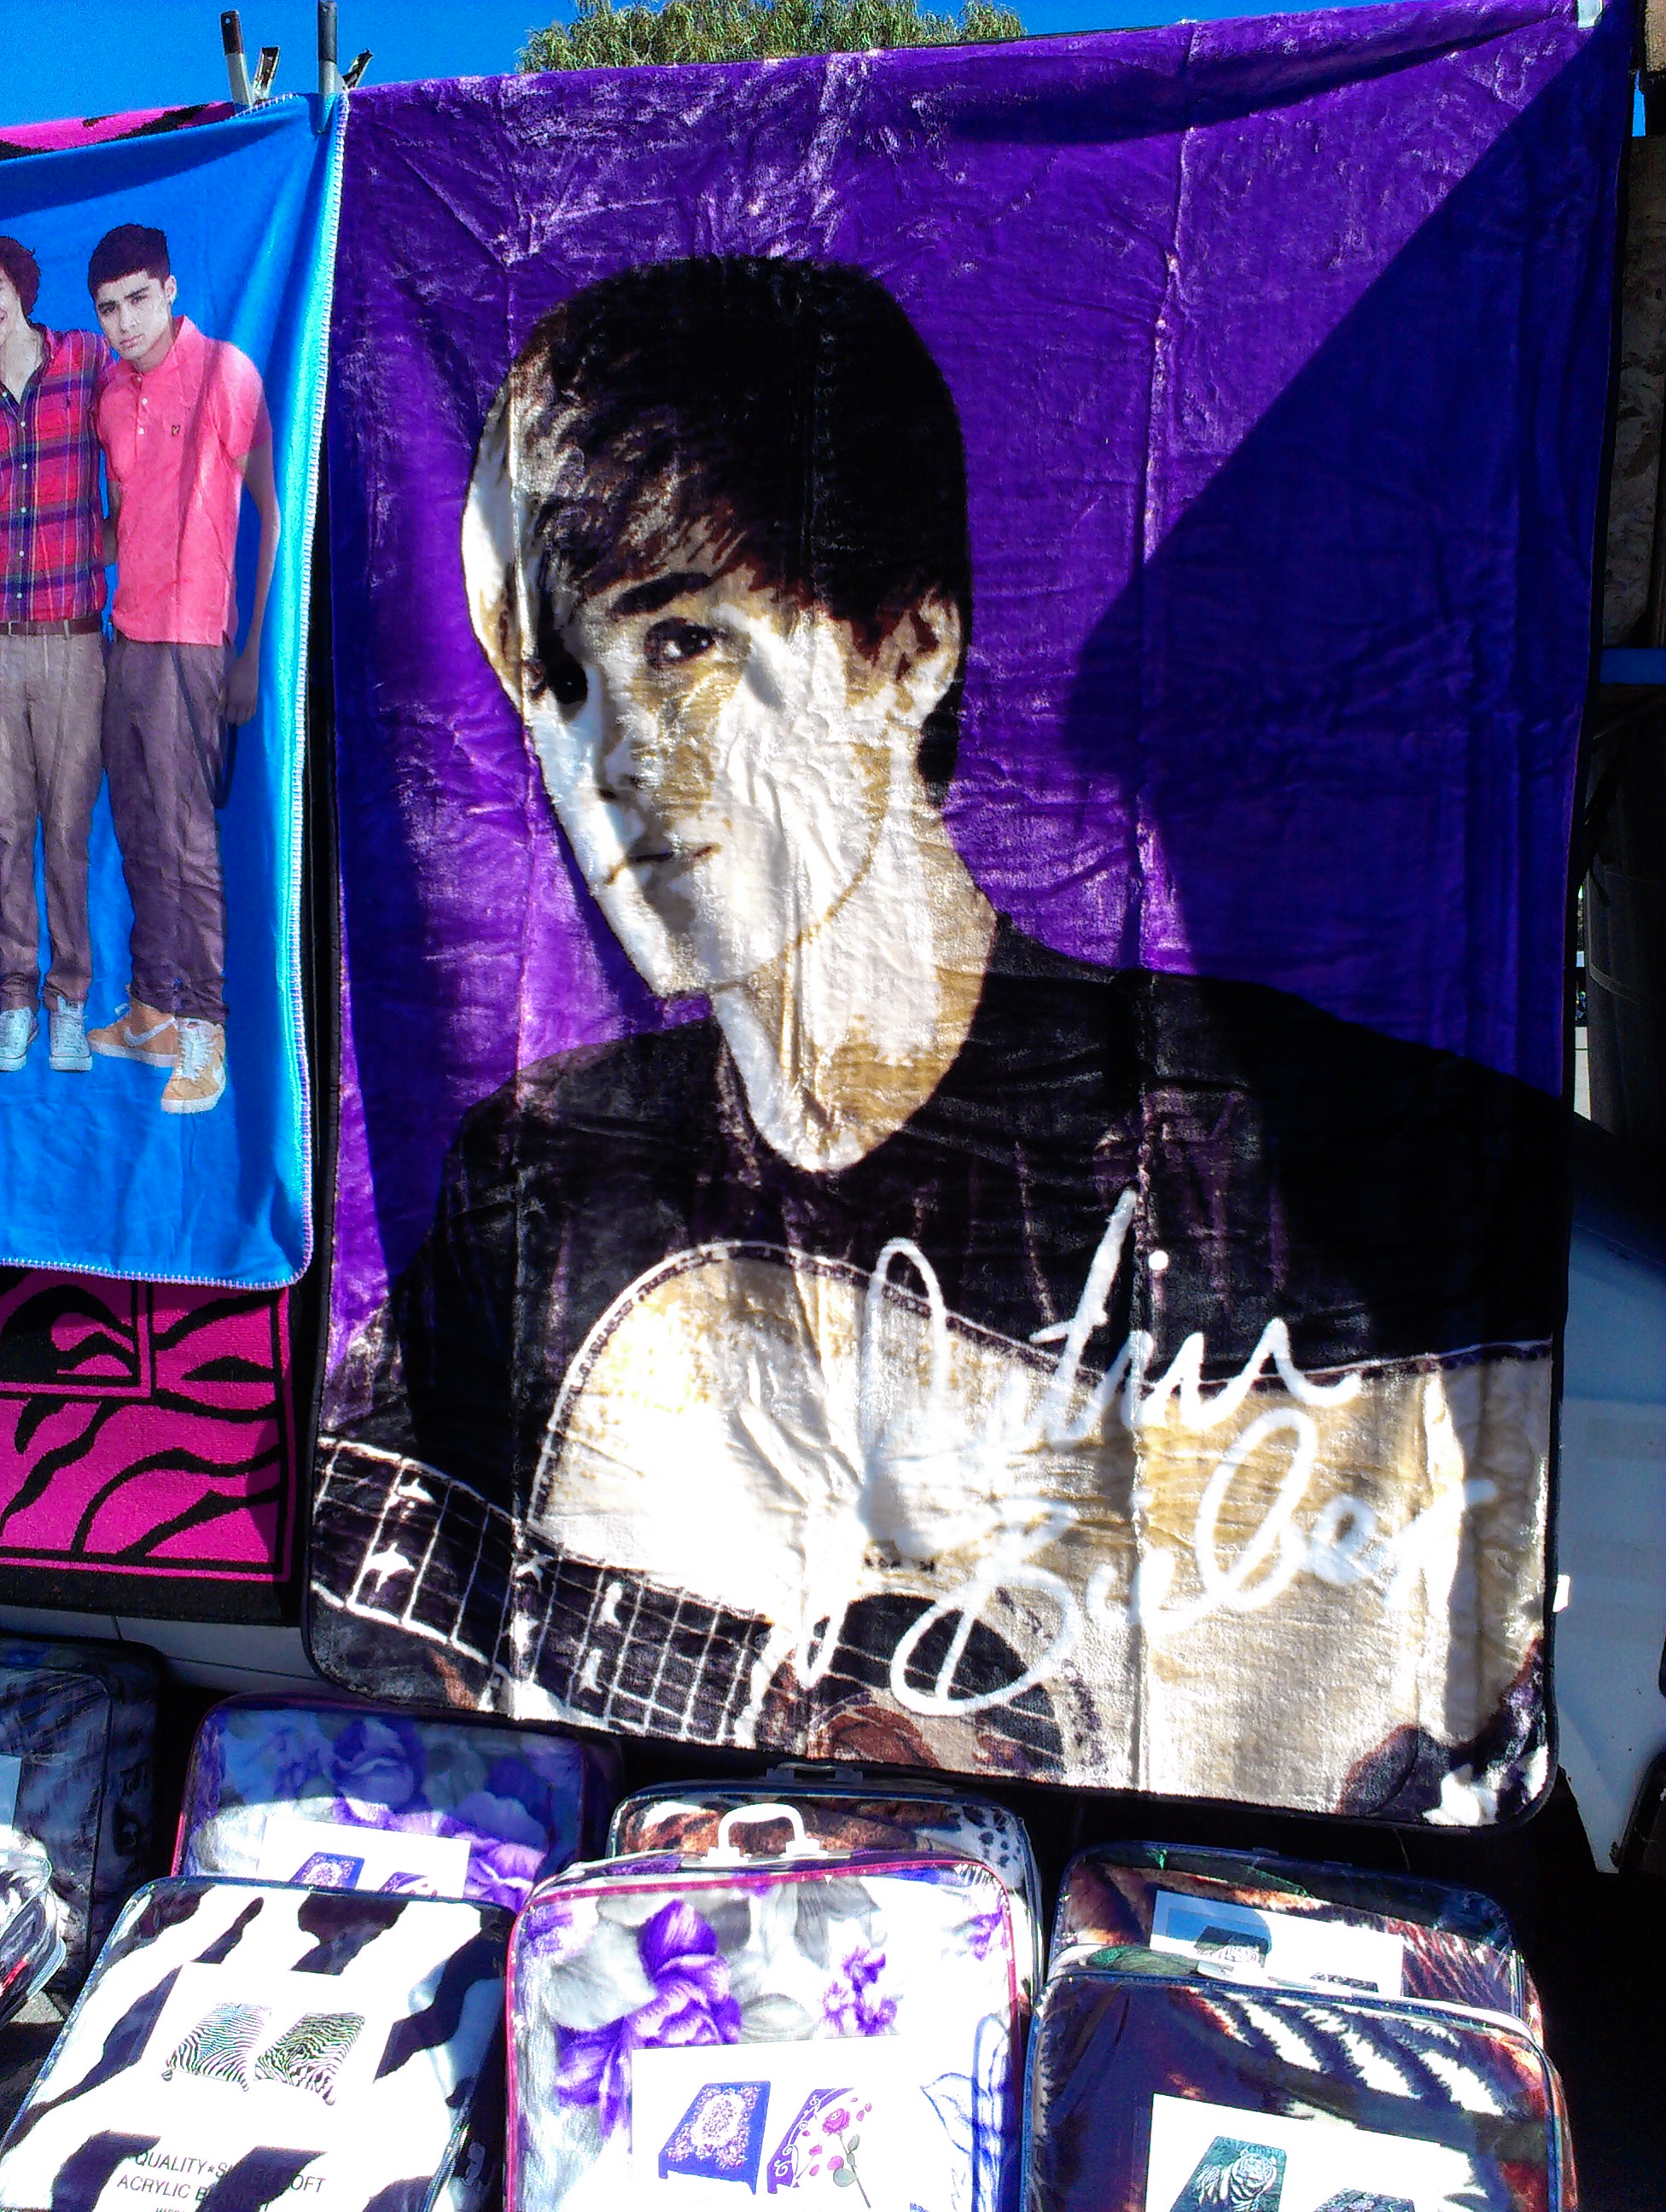 beiber blanket at the swap meet mad bed bugs